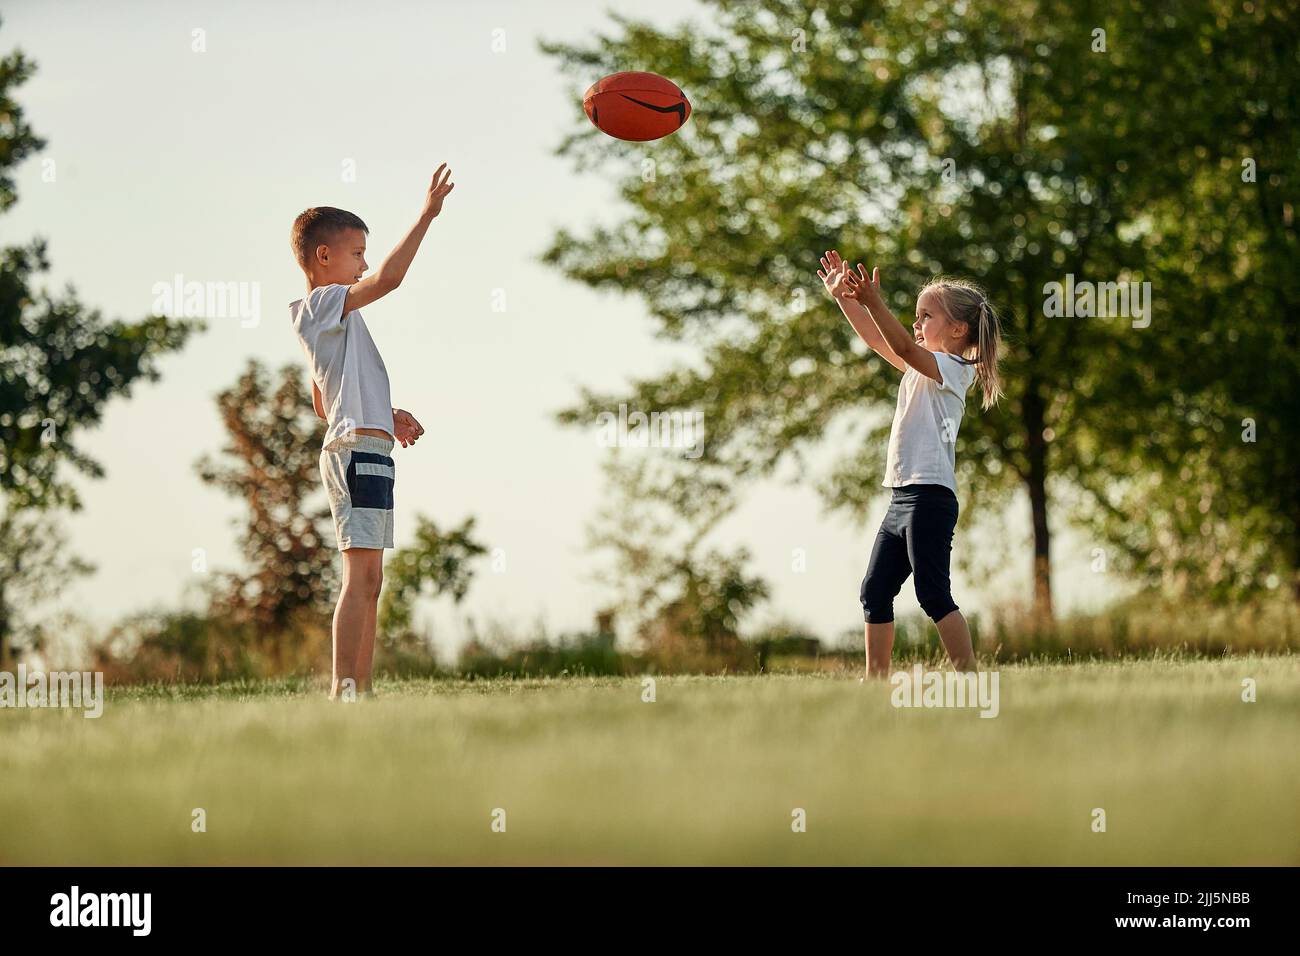 Brother and sister throwing rugby ball standing at sports field Stock Photo